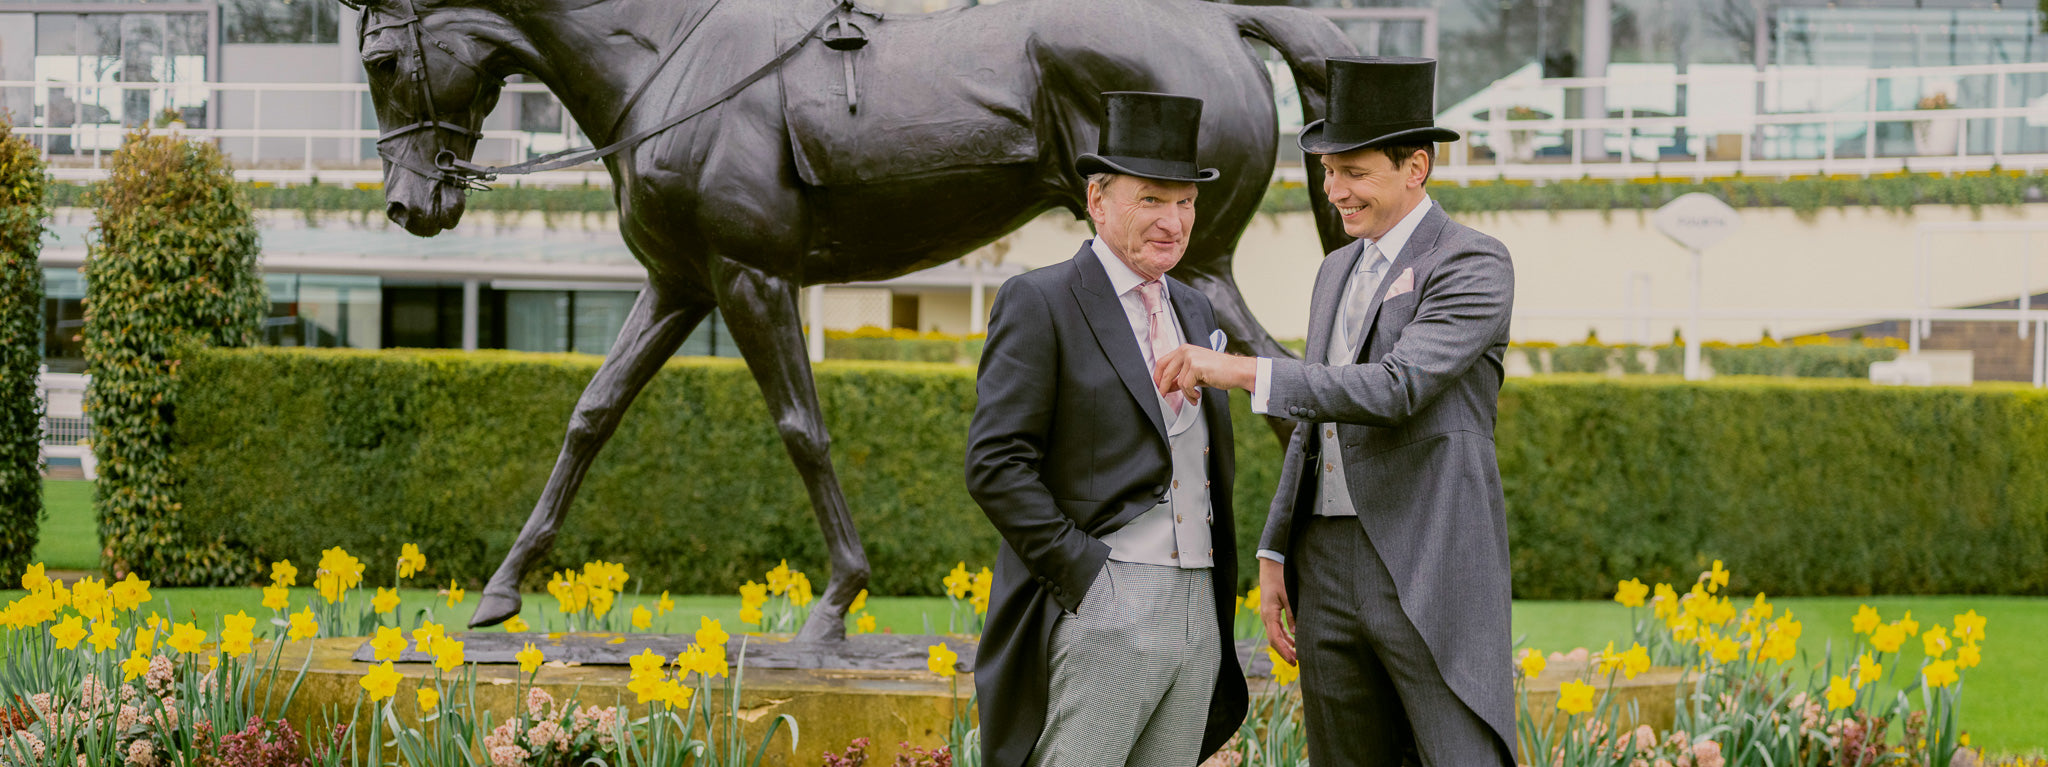 A Right Royal Ascot Round-Up!